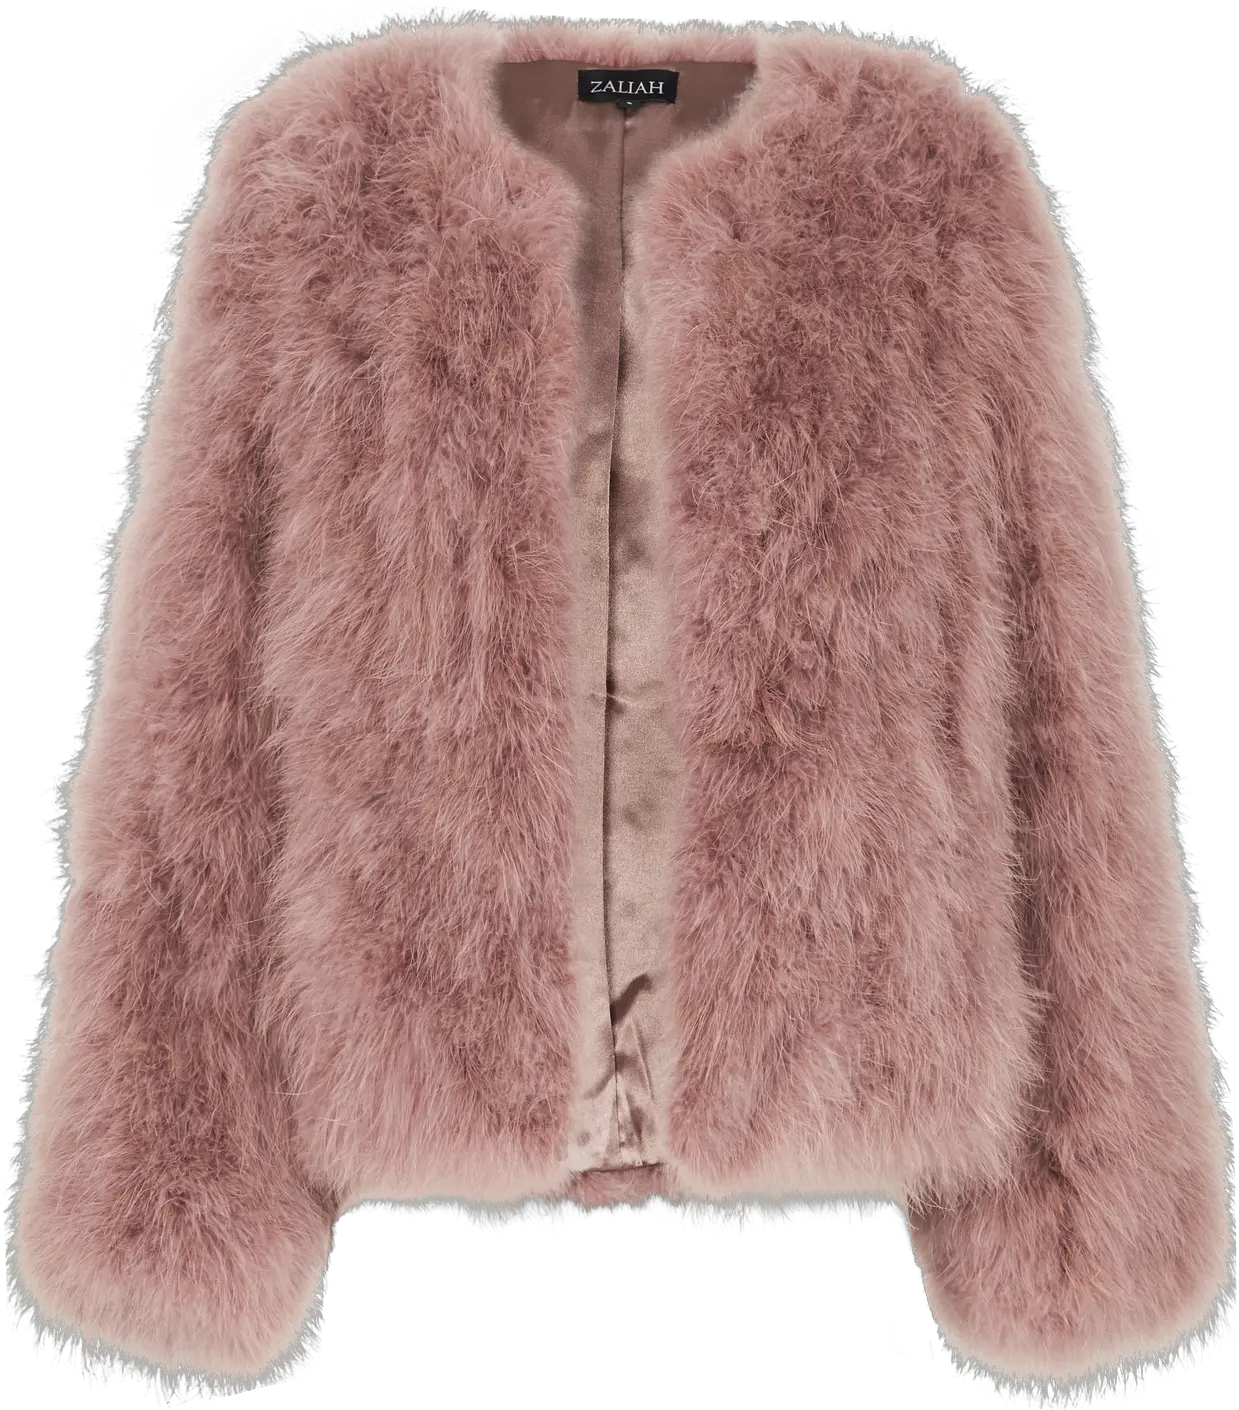 Turkey Feathers Png Blush Feather Jacket Fur Clothing Fur Clothing Blush Png